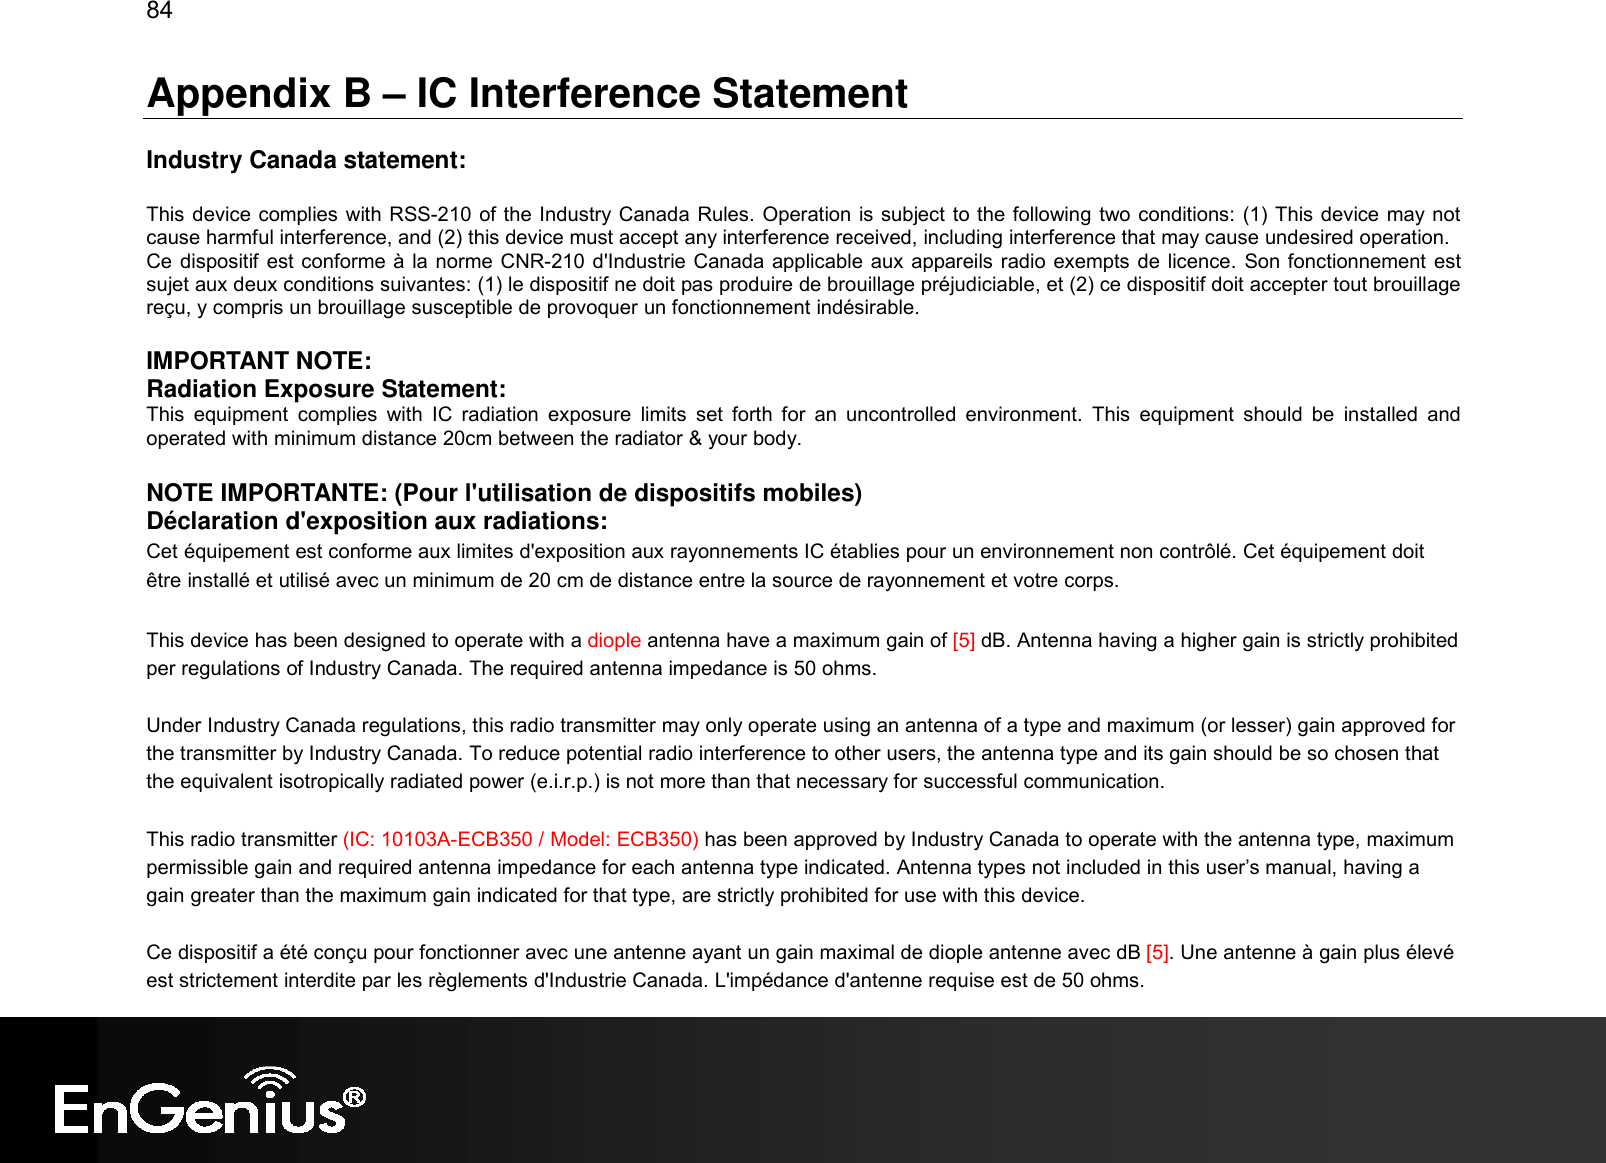 84  Appendix B – IC Interference Statement  Industry Canada statement:  This device complies with RSS-210 of the Industry Canada Rules. Operation is subject to the following two conditions: (1) This device may not cause harmful interference, and (2) this device must accept any interference received, including interference that may cause undesired operation. Ce dispositif est conforme à la norme CNR-210 d&apos;Industrie Canada applicable aux appareils radio exempts de licence. Son fonctionnement est sujet aux deux conditions suivantes: (1) le dispositif ne doit pas produire de brouillage préjudiciable, et (2) ce dispositif doit accepter tout brouillage reçu, y compris un brouillage susceptible de provoquer un fonctionnement indésirable.   IMPORTANT NOTE:  Radiation Exposure Statement: This  equipment  complies  with  IC  radiation  exposure  limits  set  forth  for  an  uncontrolled  environment.  This  equipment  should  be  installed  and operated with minimum distance 20cm between the radiator &amp; your body. NOTE IMPORTANTE: (Pour l&apos;utilisation de dispositifs mobiles) Déclaration d&apos;exposition aux radiations: Cet équipement est conforme aux limites d&apos;exposition aux rayonnements IC établies pour un environnement non contrôlé. Cet équipement doit être installé et utilisé avec un minimum de 20 cm de distance entre la source de rayonnement et votre corps.  This device has been designed to operate with a diople antenna have a maximum gain of [5] dB. Antenna having a higher gain is strictly prohibited per regulations of Industry Canada. The required antenna impedance is 50 ohms. Under Industry Canada regulations, this radio transmitter may only operate using an antenna of a type and maximum (or lesser) gain approved for the transmitter by Industry Canada. To reduce potential radio interference to other users, the antenna type and its gain should be so chosen that the equivalent isotropically radiated power (e.i.r.p.) is not more than that necessary for successful communication. This radio transmitter (IC: 10103A-ECB350 / Model: ECB350) has been approved by Industry Canada to operate with the antenna type, maximum permissible gain and required antenna impedance for each antenna type indicated. Antenna types not included in this user’s manual, having a gain greater than the maximum gain indicated for that type, are strictly prohibited for use with this device. Ce dispositif a été conçu pour fonctionner avec une antenne ayant un gain maximal de diople antenne avec dB [5]. Une antenne à gain plus élevé est strictement interdite par les règlements d&apos;Industrie Canada. L&apos;impédance d&apos;antenne requise est de 50 ohms. 